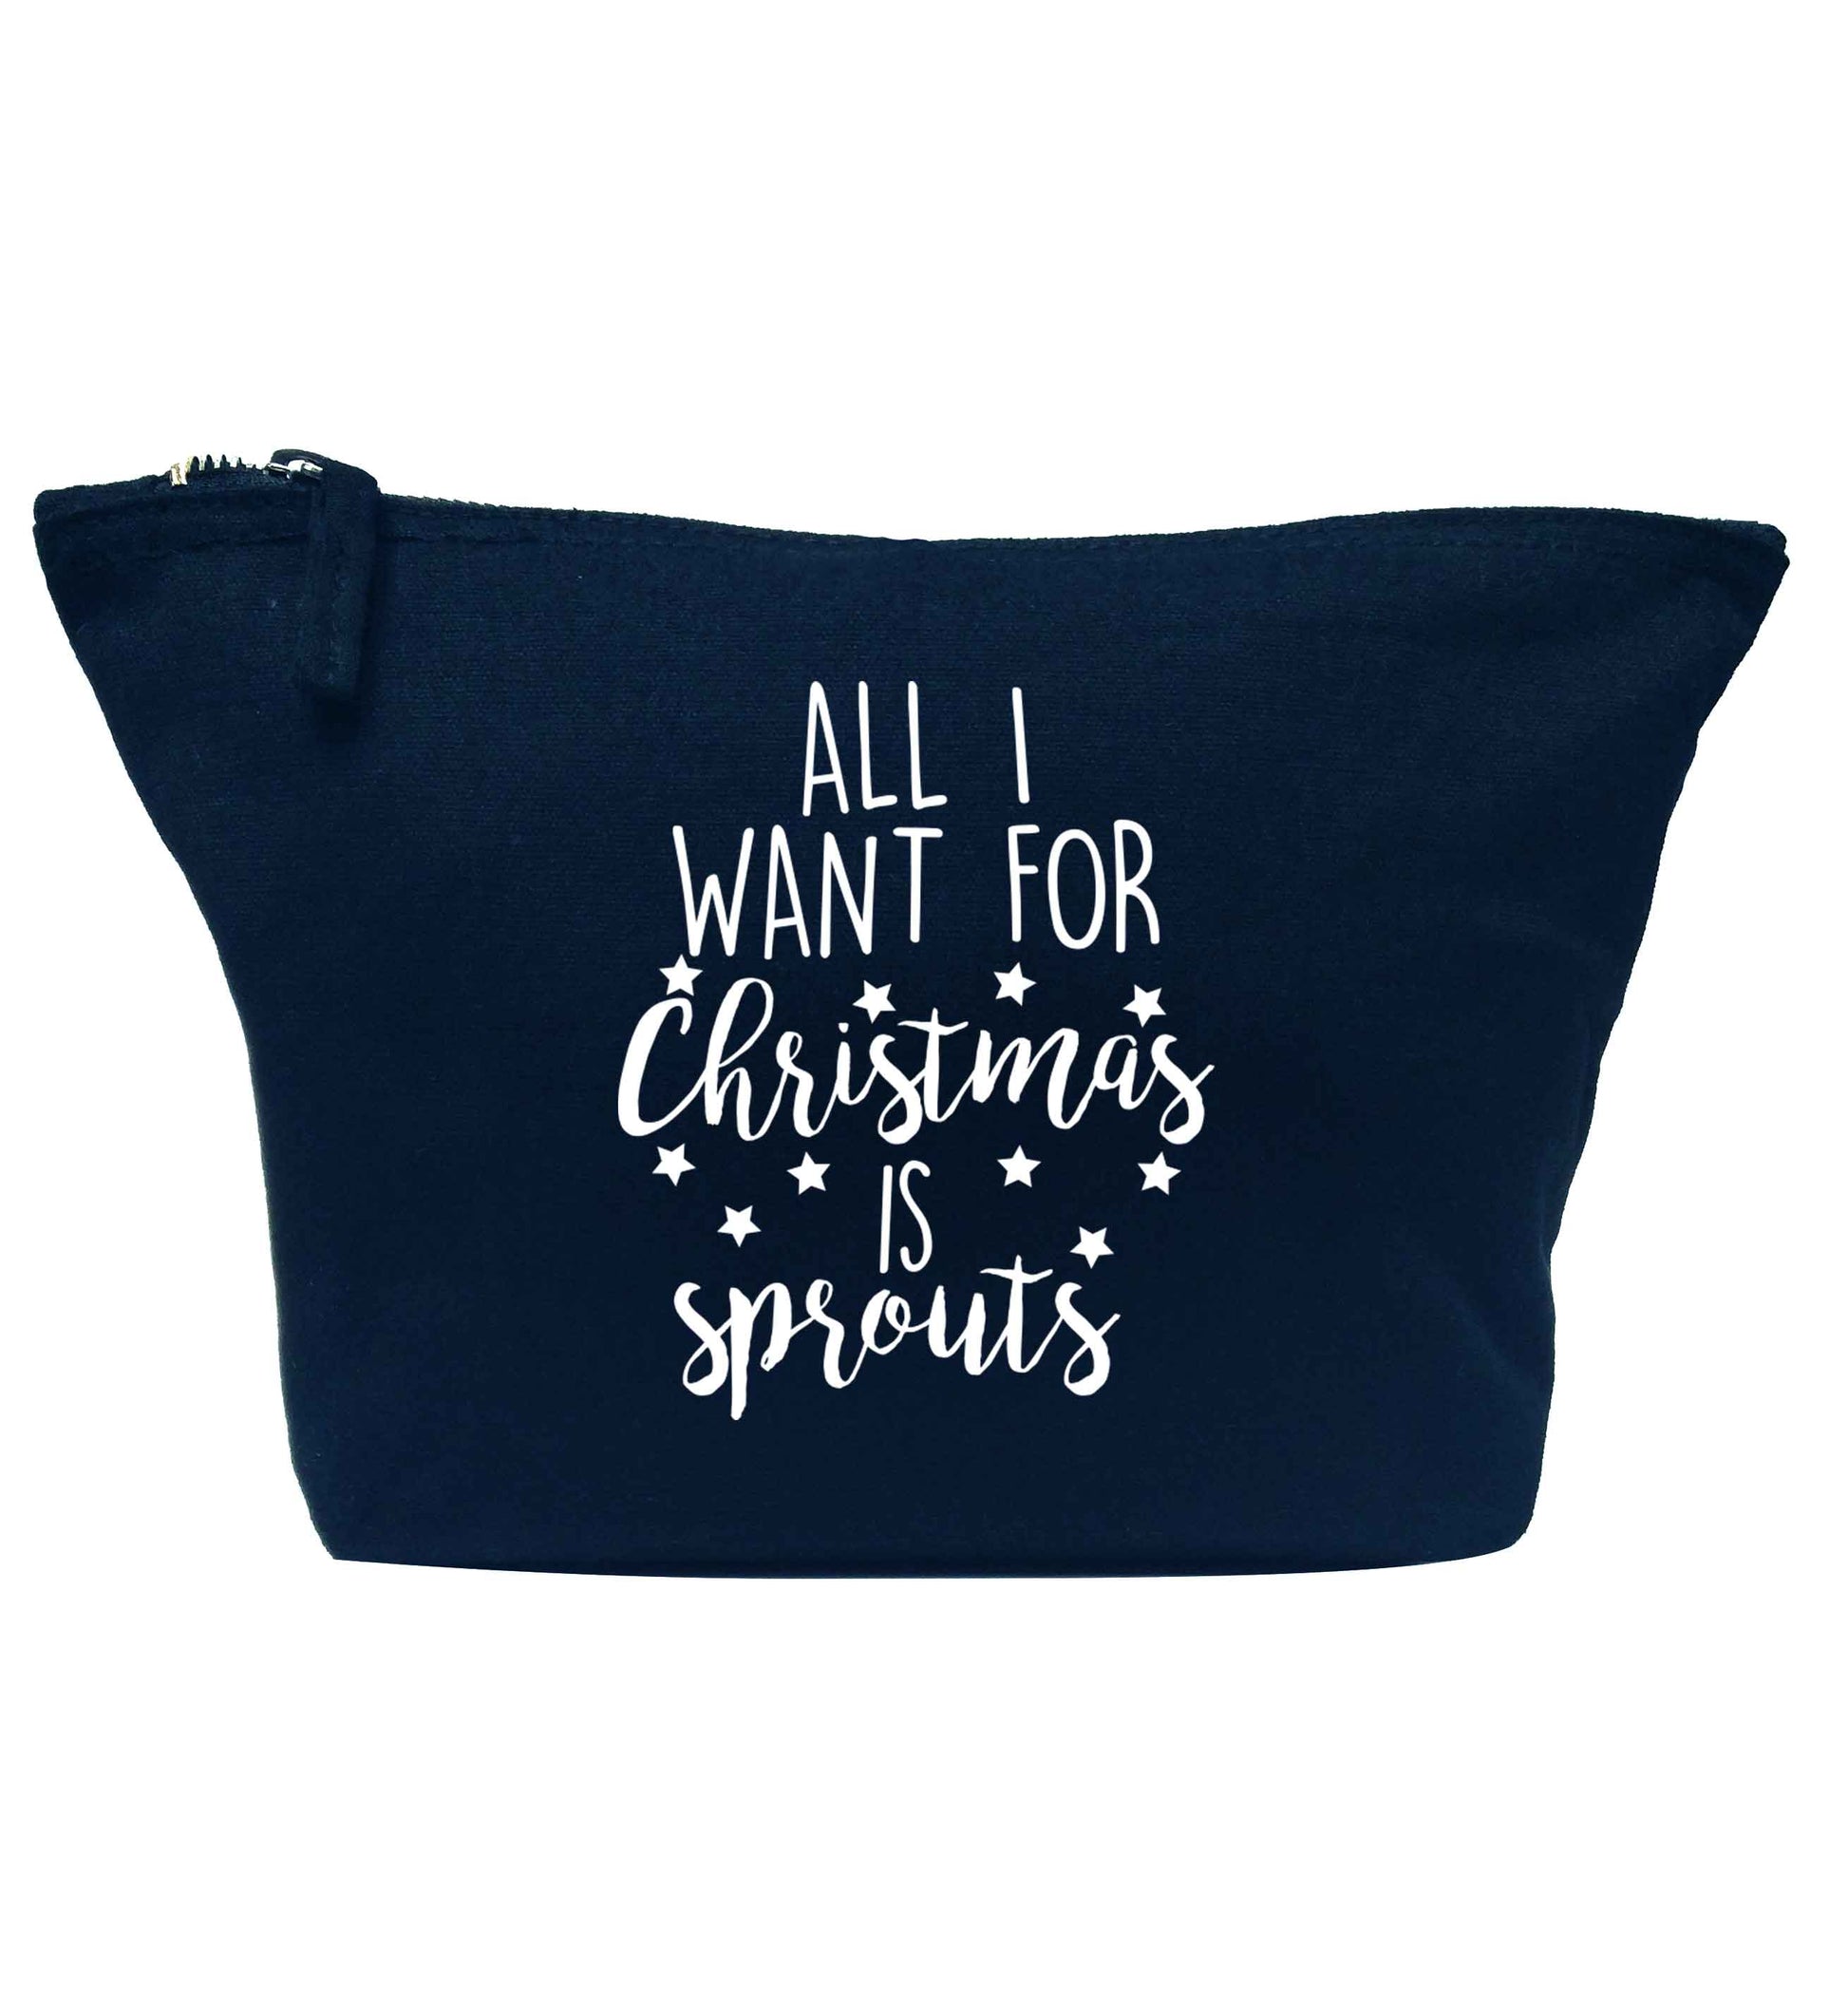 All I want for Christmas is sprouts navy makeup bag